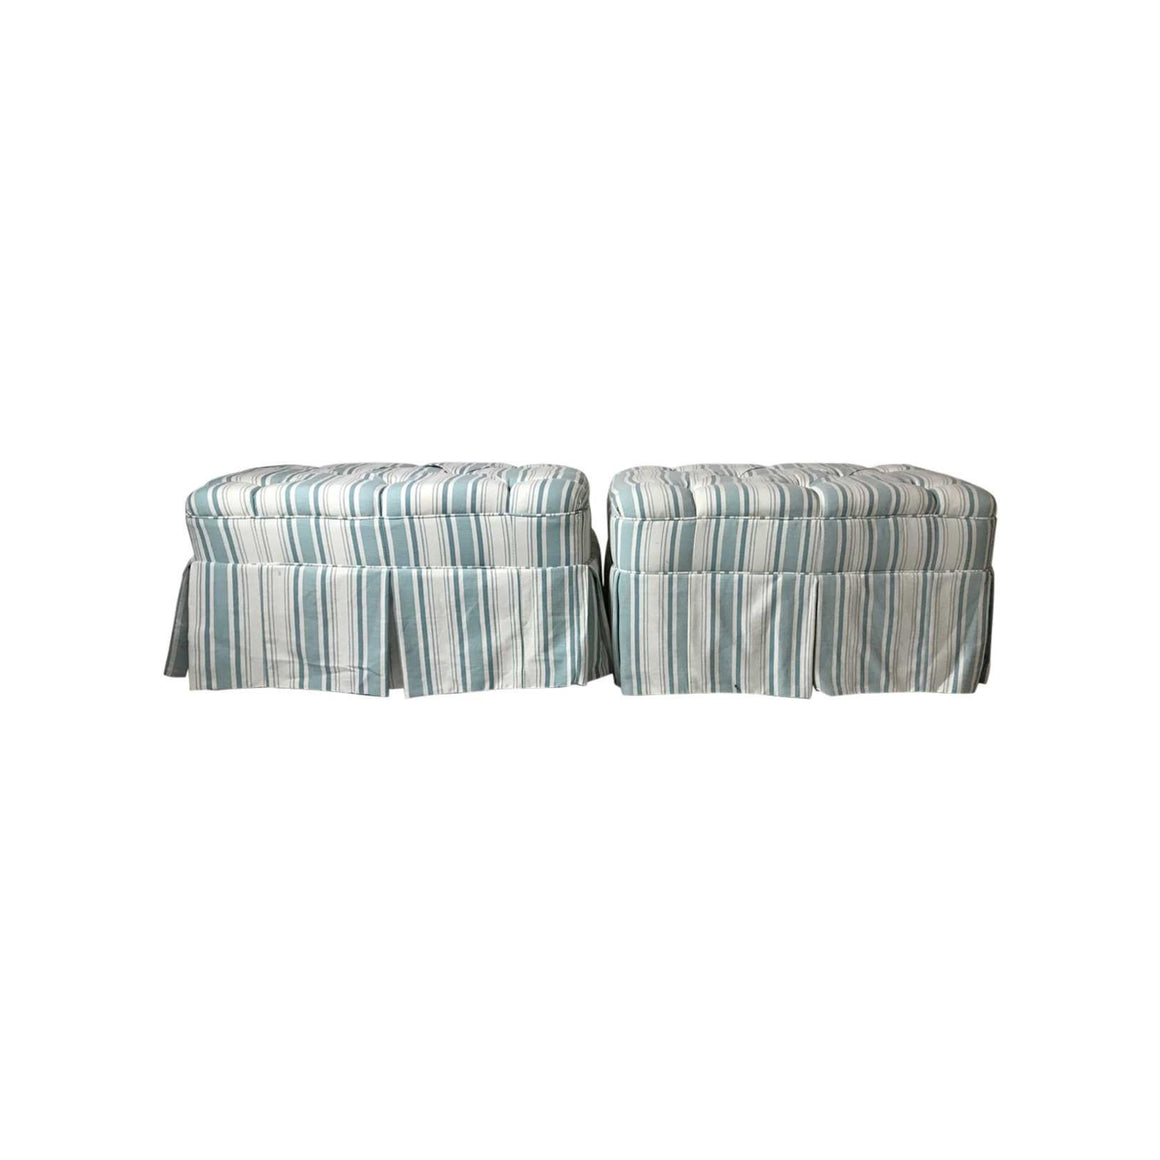 Pair of Danielle Rollins Tufted Ottomans